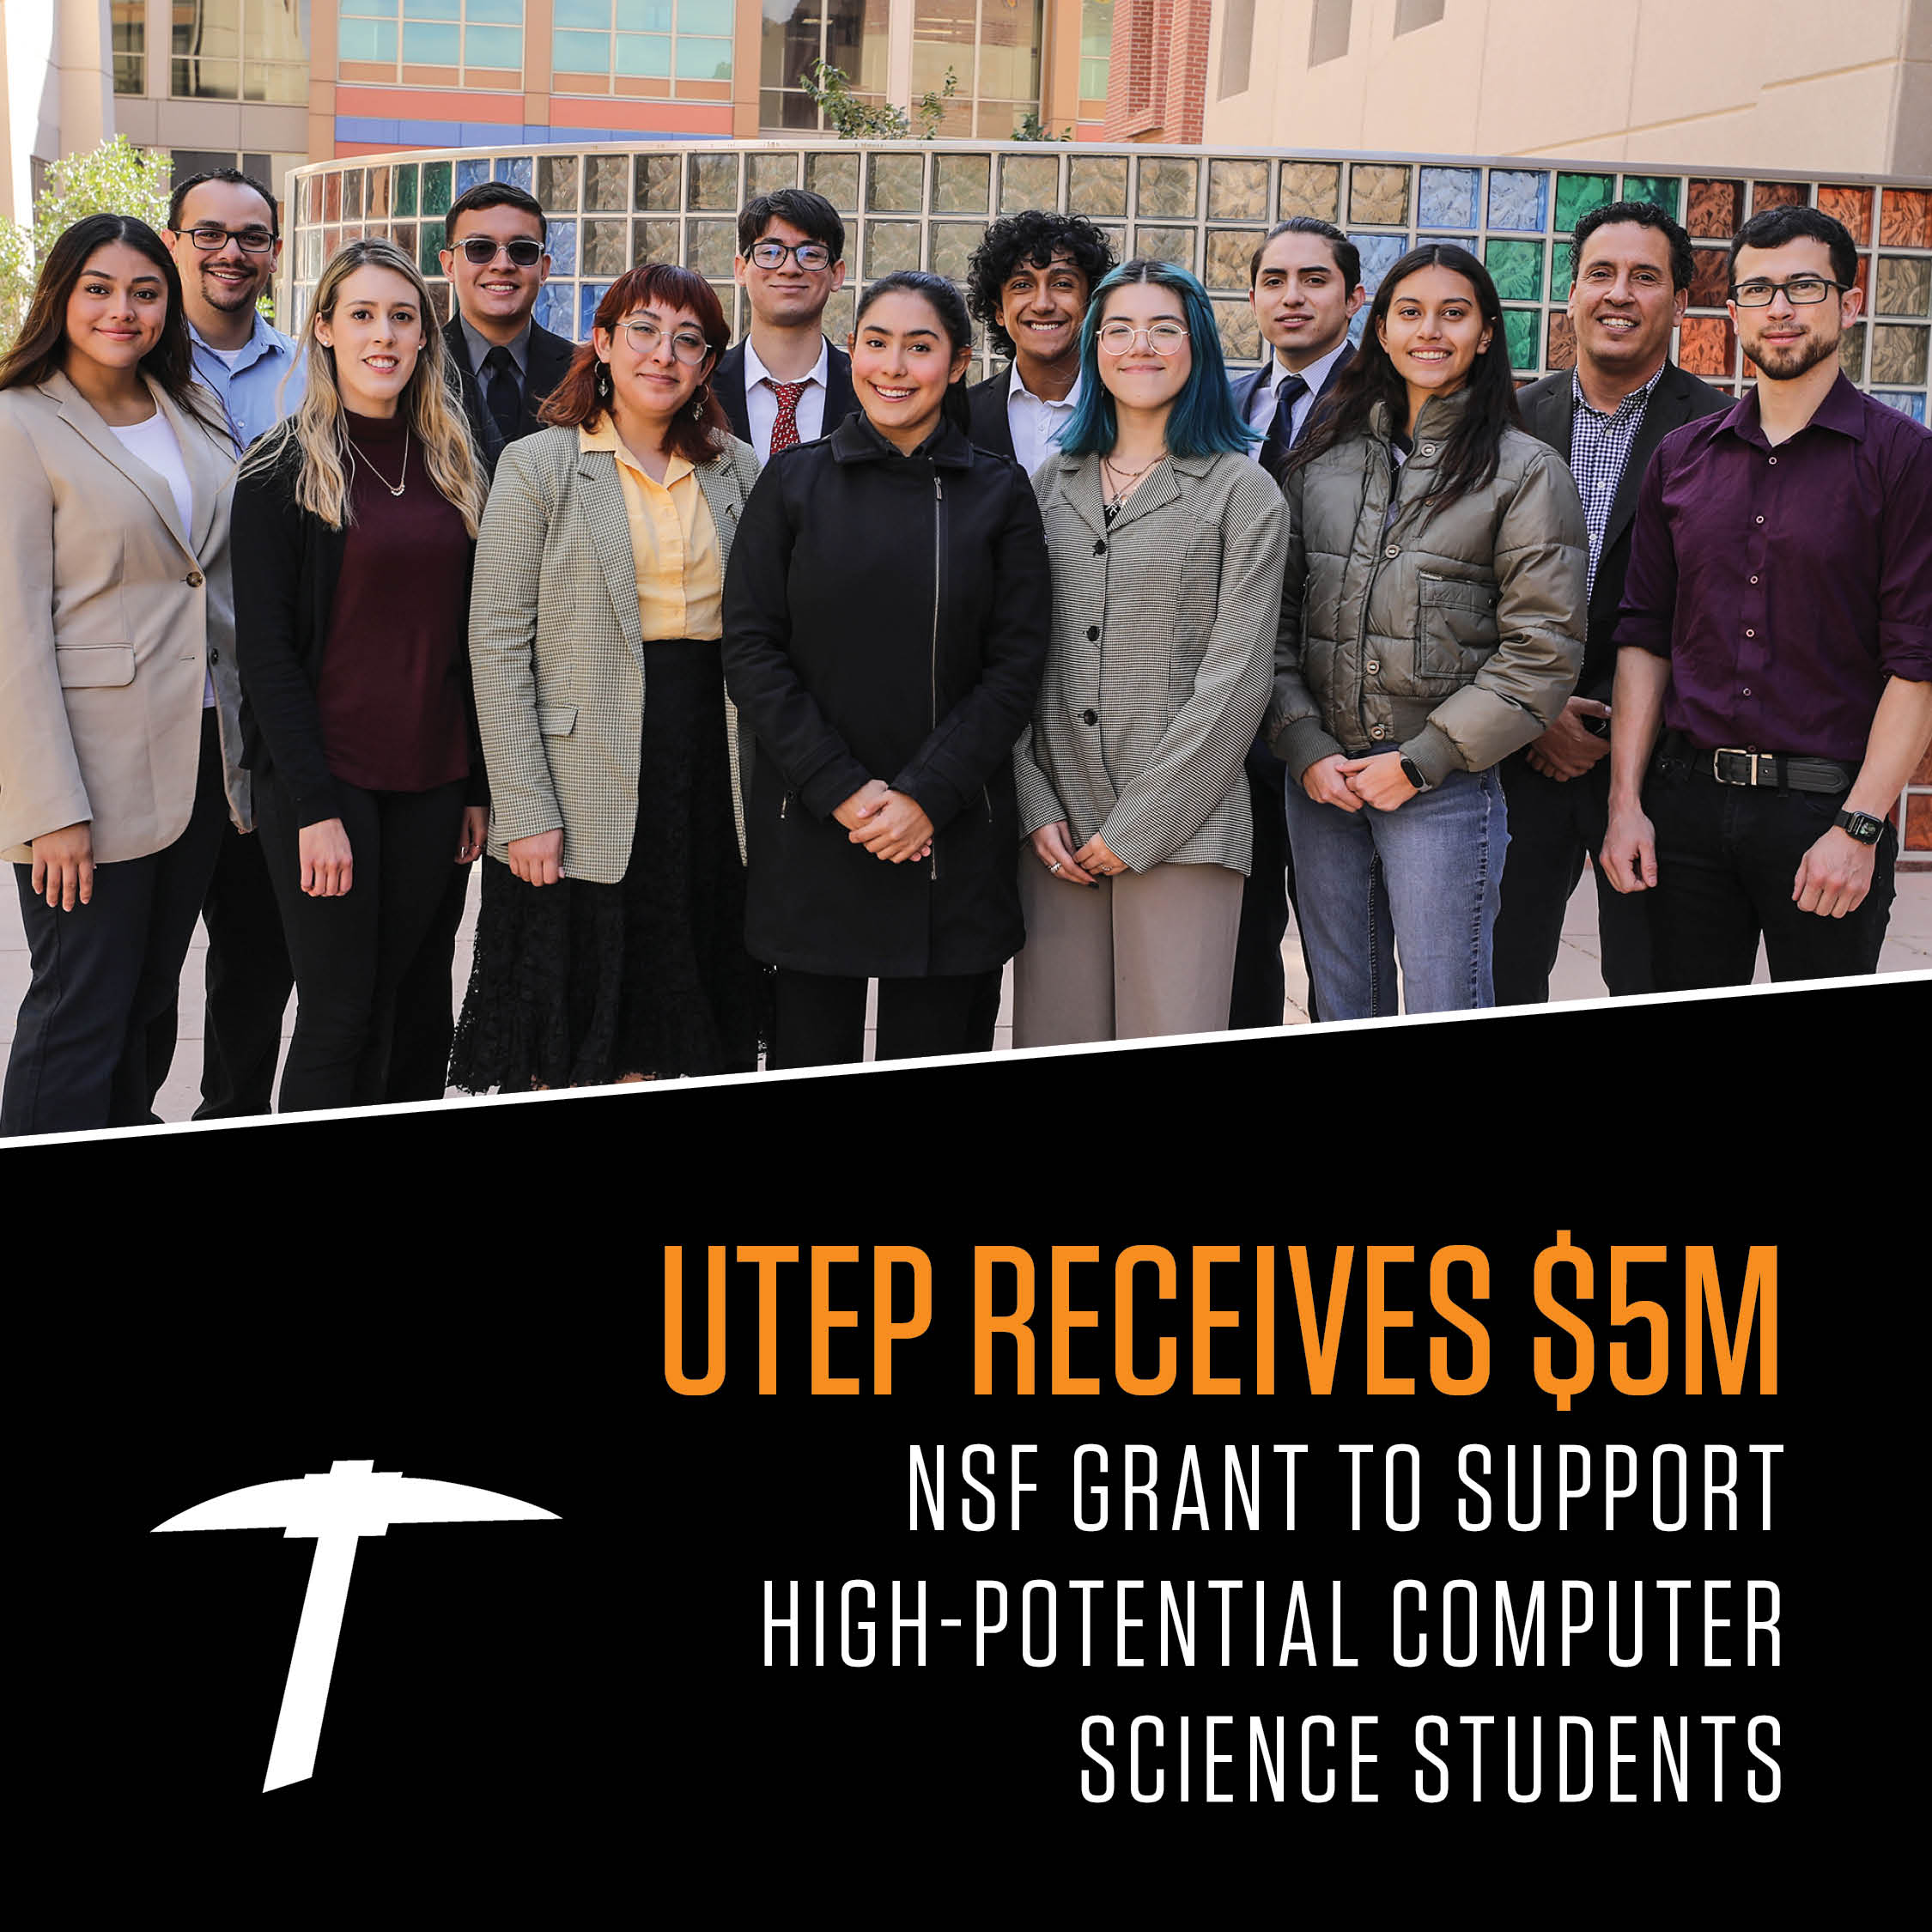 UTEP Receives 5M NSF Grant to Support High-Potential Computer Science Students